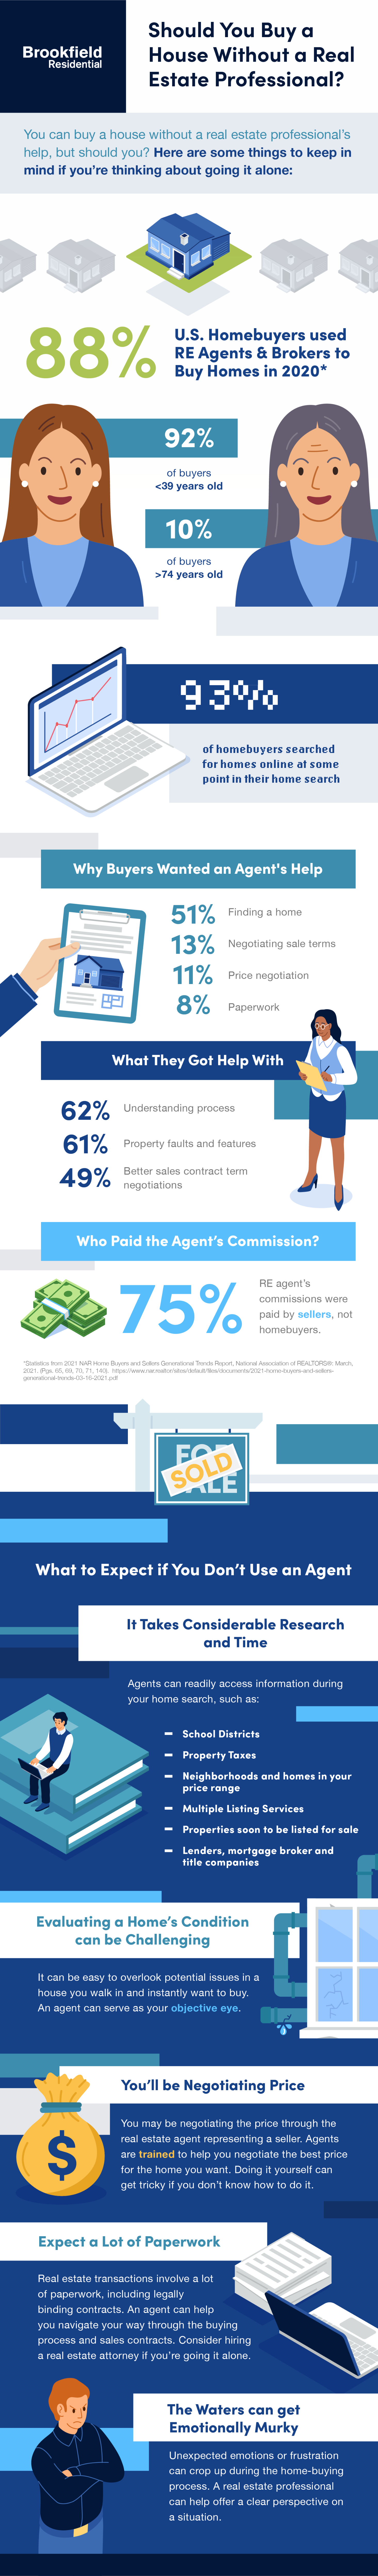 Should you buy a home without a real estate professional infographic by Brookfield Residential